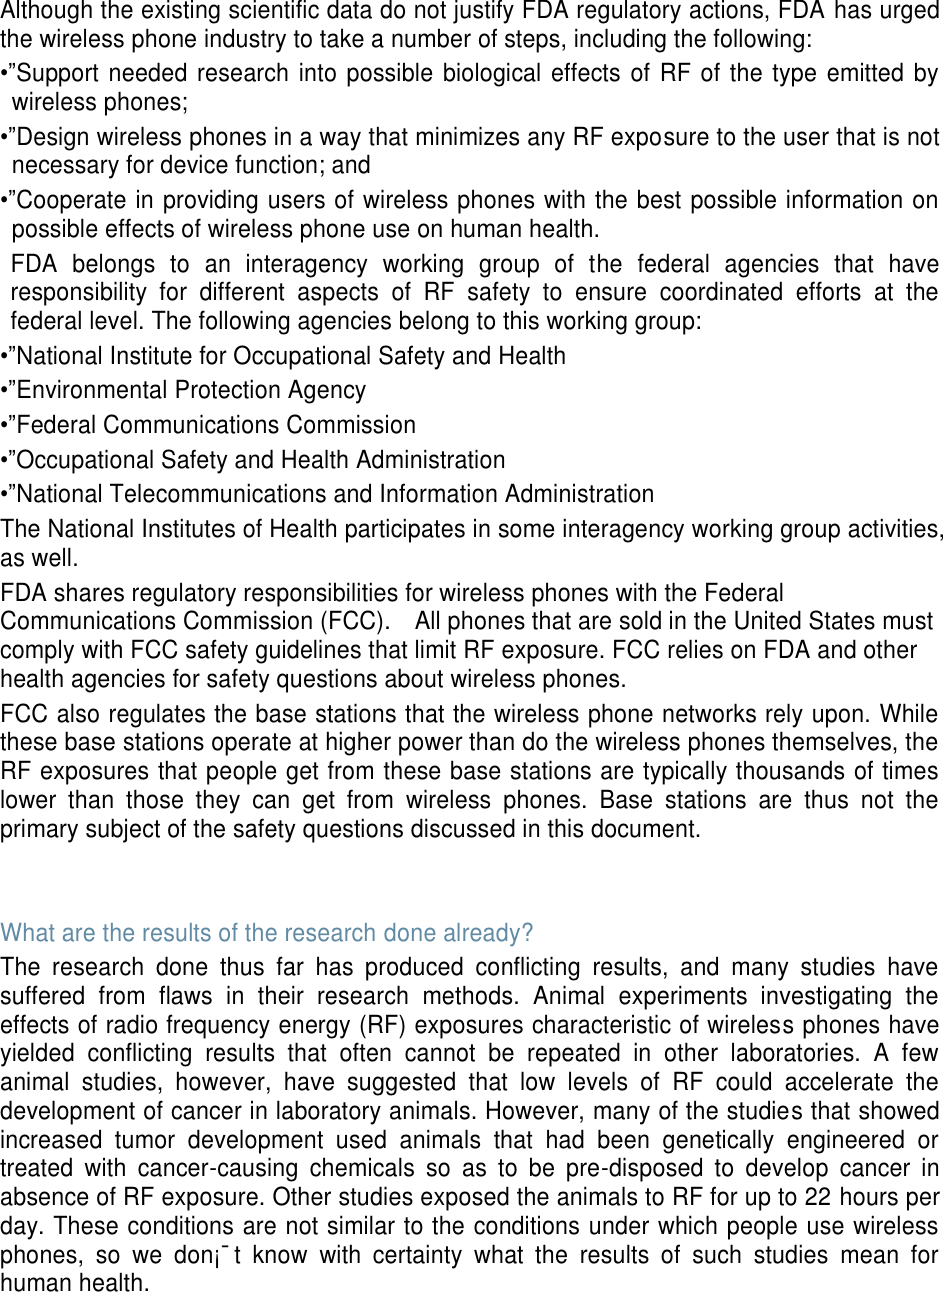 Although the existing scientific data do not justify FDA regulatory actions, FDA has urged the wireless phone industry to take a number of steps, including the following: •”Support needed research into possible biological effects of RF of the type emitted  by wireless phones; •”Design wireless phones in a way that minimizes any RF exposure to the user that is not necessary for device function; and •”Cooperate in providing users of wireless phones with the best possible information on possible effects of wireless phone use on human health. FDA  belongs  to  an  interagency  working  group  of  the  federal  agencies  that  have responsibility  for  different  aspects  of  RF  safety  to  ensure  coordinated  efforts  at  the federal level. The following agencies belong to this working group: •”National Institute for Occupational Safety and Health •”Environmental Protection Agency •”Federal Communications Commission •”Occupational Safety and Health Administration •”National Telecommunications and Information Administration The National Institutes of Health participates in some interagency working group activities, as well. FDA shares regulatory responsibilities for wireless phones with the Federal Communications Commission (FCC).    All phones that are sold in the United States must comply with FCC safety guidelines that limit RF exposure. FCC relies on FDA and other health agencies for safety questions about wireless phones. FCC also regulates the base stations that the wireless phone networks rely upon. While these base stations operate at higher power than do the wireless phones themselves, the RF exposures that people get from these base stations are typically thousands of times lower  than  those  they  can  get  from  wireless  phones.  Base  stations  are  thus  not  the primary subject of the safety questions discussed in this document.   What are the results of the research done already? The  research  done  thus  far  has  produced  conflicting  results,  and  many  studies  have suffered  from  flaws  in  their  research  methods.  Animal  experiments  investigating  the effects of radio frequency energy (RF) exposures characteristic of wireless phones have yielded  conflicting  results  that  often  cannot  be  repeated  in  other  laboratories.  A  few animal  studies,  however,  have  suggested  that  low  levels  of  RF  could  accelerate  the development of cancer in laboratory animals. However, many of the studies that showed increased  tumor  development  used  animals  that  had  been  genetically  engineered  or treated  with  cancer-causing  chemicals  so  as  to  be  pre-disposed  to  develop  cancer  in absence of RF exposure. Other studies exposed the animals to RF for up to 22 hours per day. These conditions are not similar to the conditions under which people use wireless phones,  so  we  don¡¯t  know  with  certainty  what  the  results  of  such  studies  mean  for human health.    